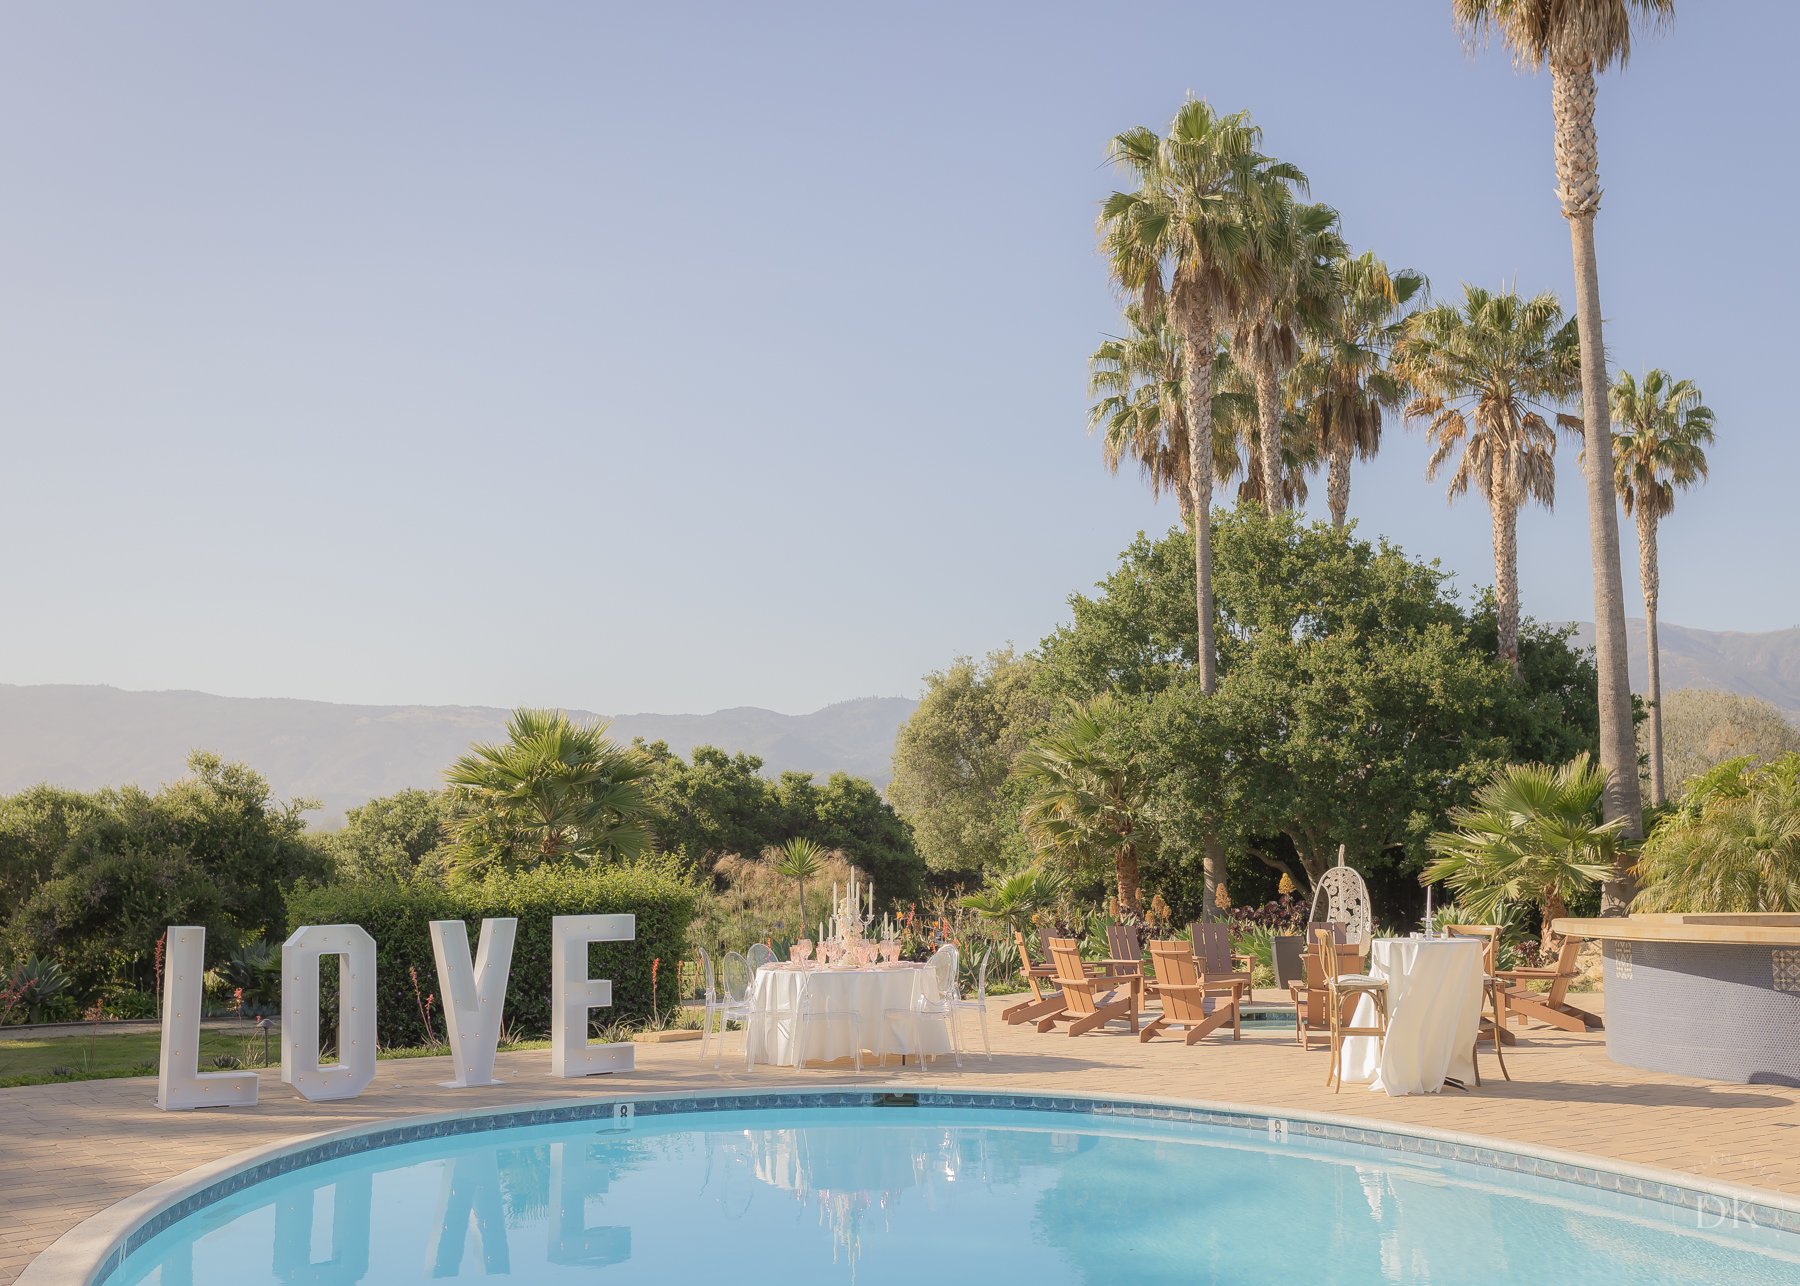 www.santabarbarawedding.com | Hidden Oaks Ranch | Love Sign and Set Up by the Pool at Wedding Venue